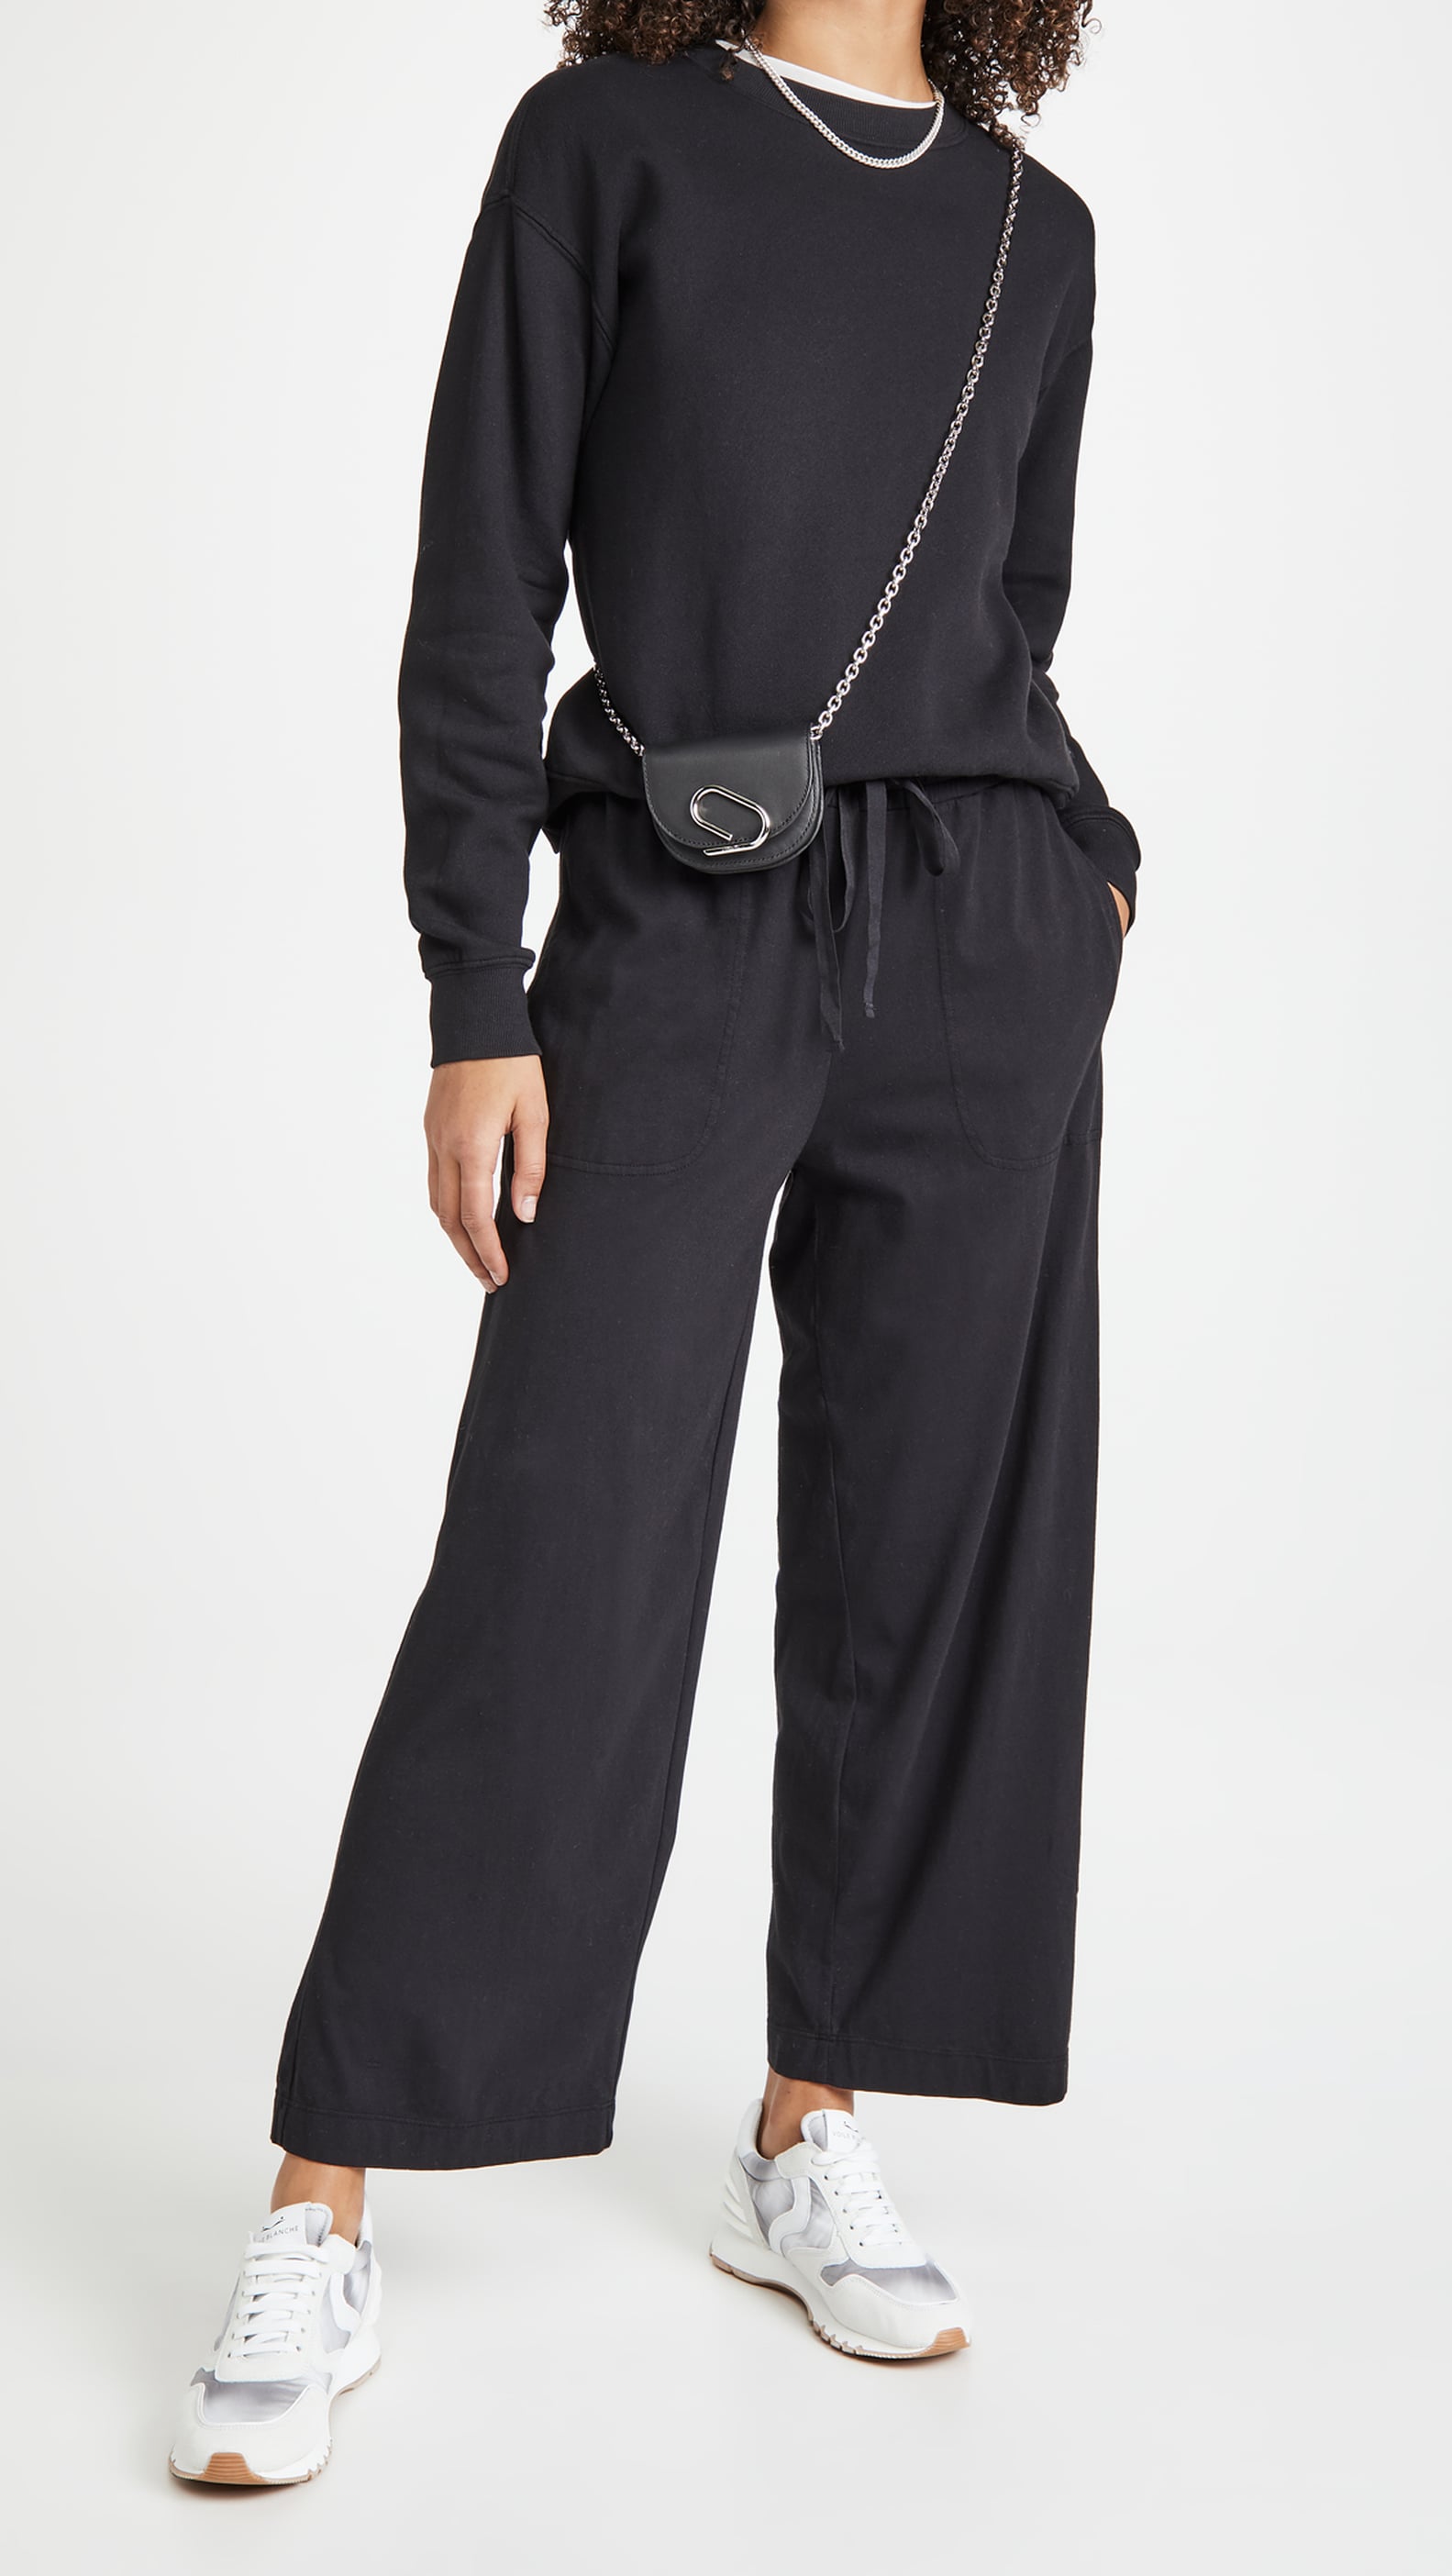 Best and Most Comfortable Lounge Pants For Women 2021 | POPSUGAR Fashion